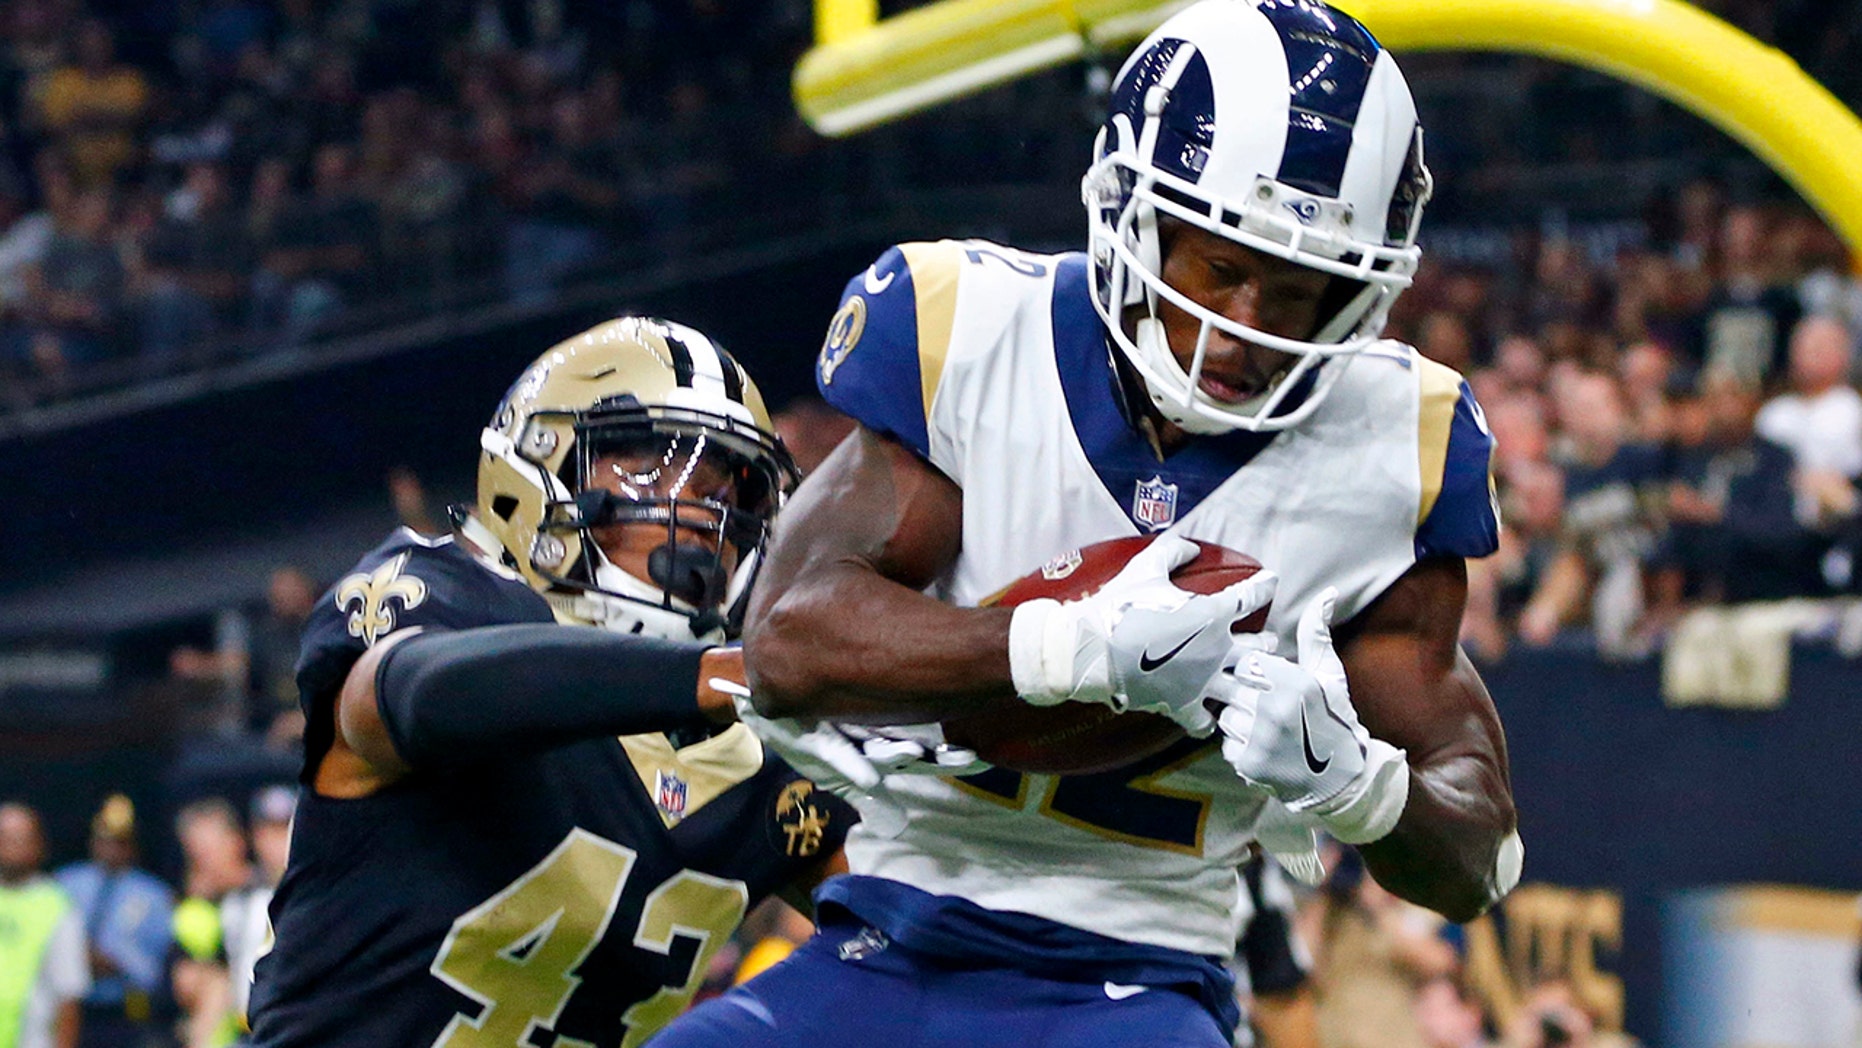 Brandin Cooks gifted Super Bowl tickets to the Rams' custodian.